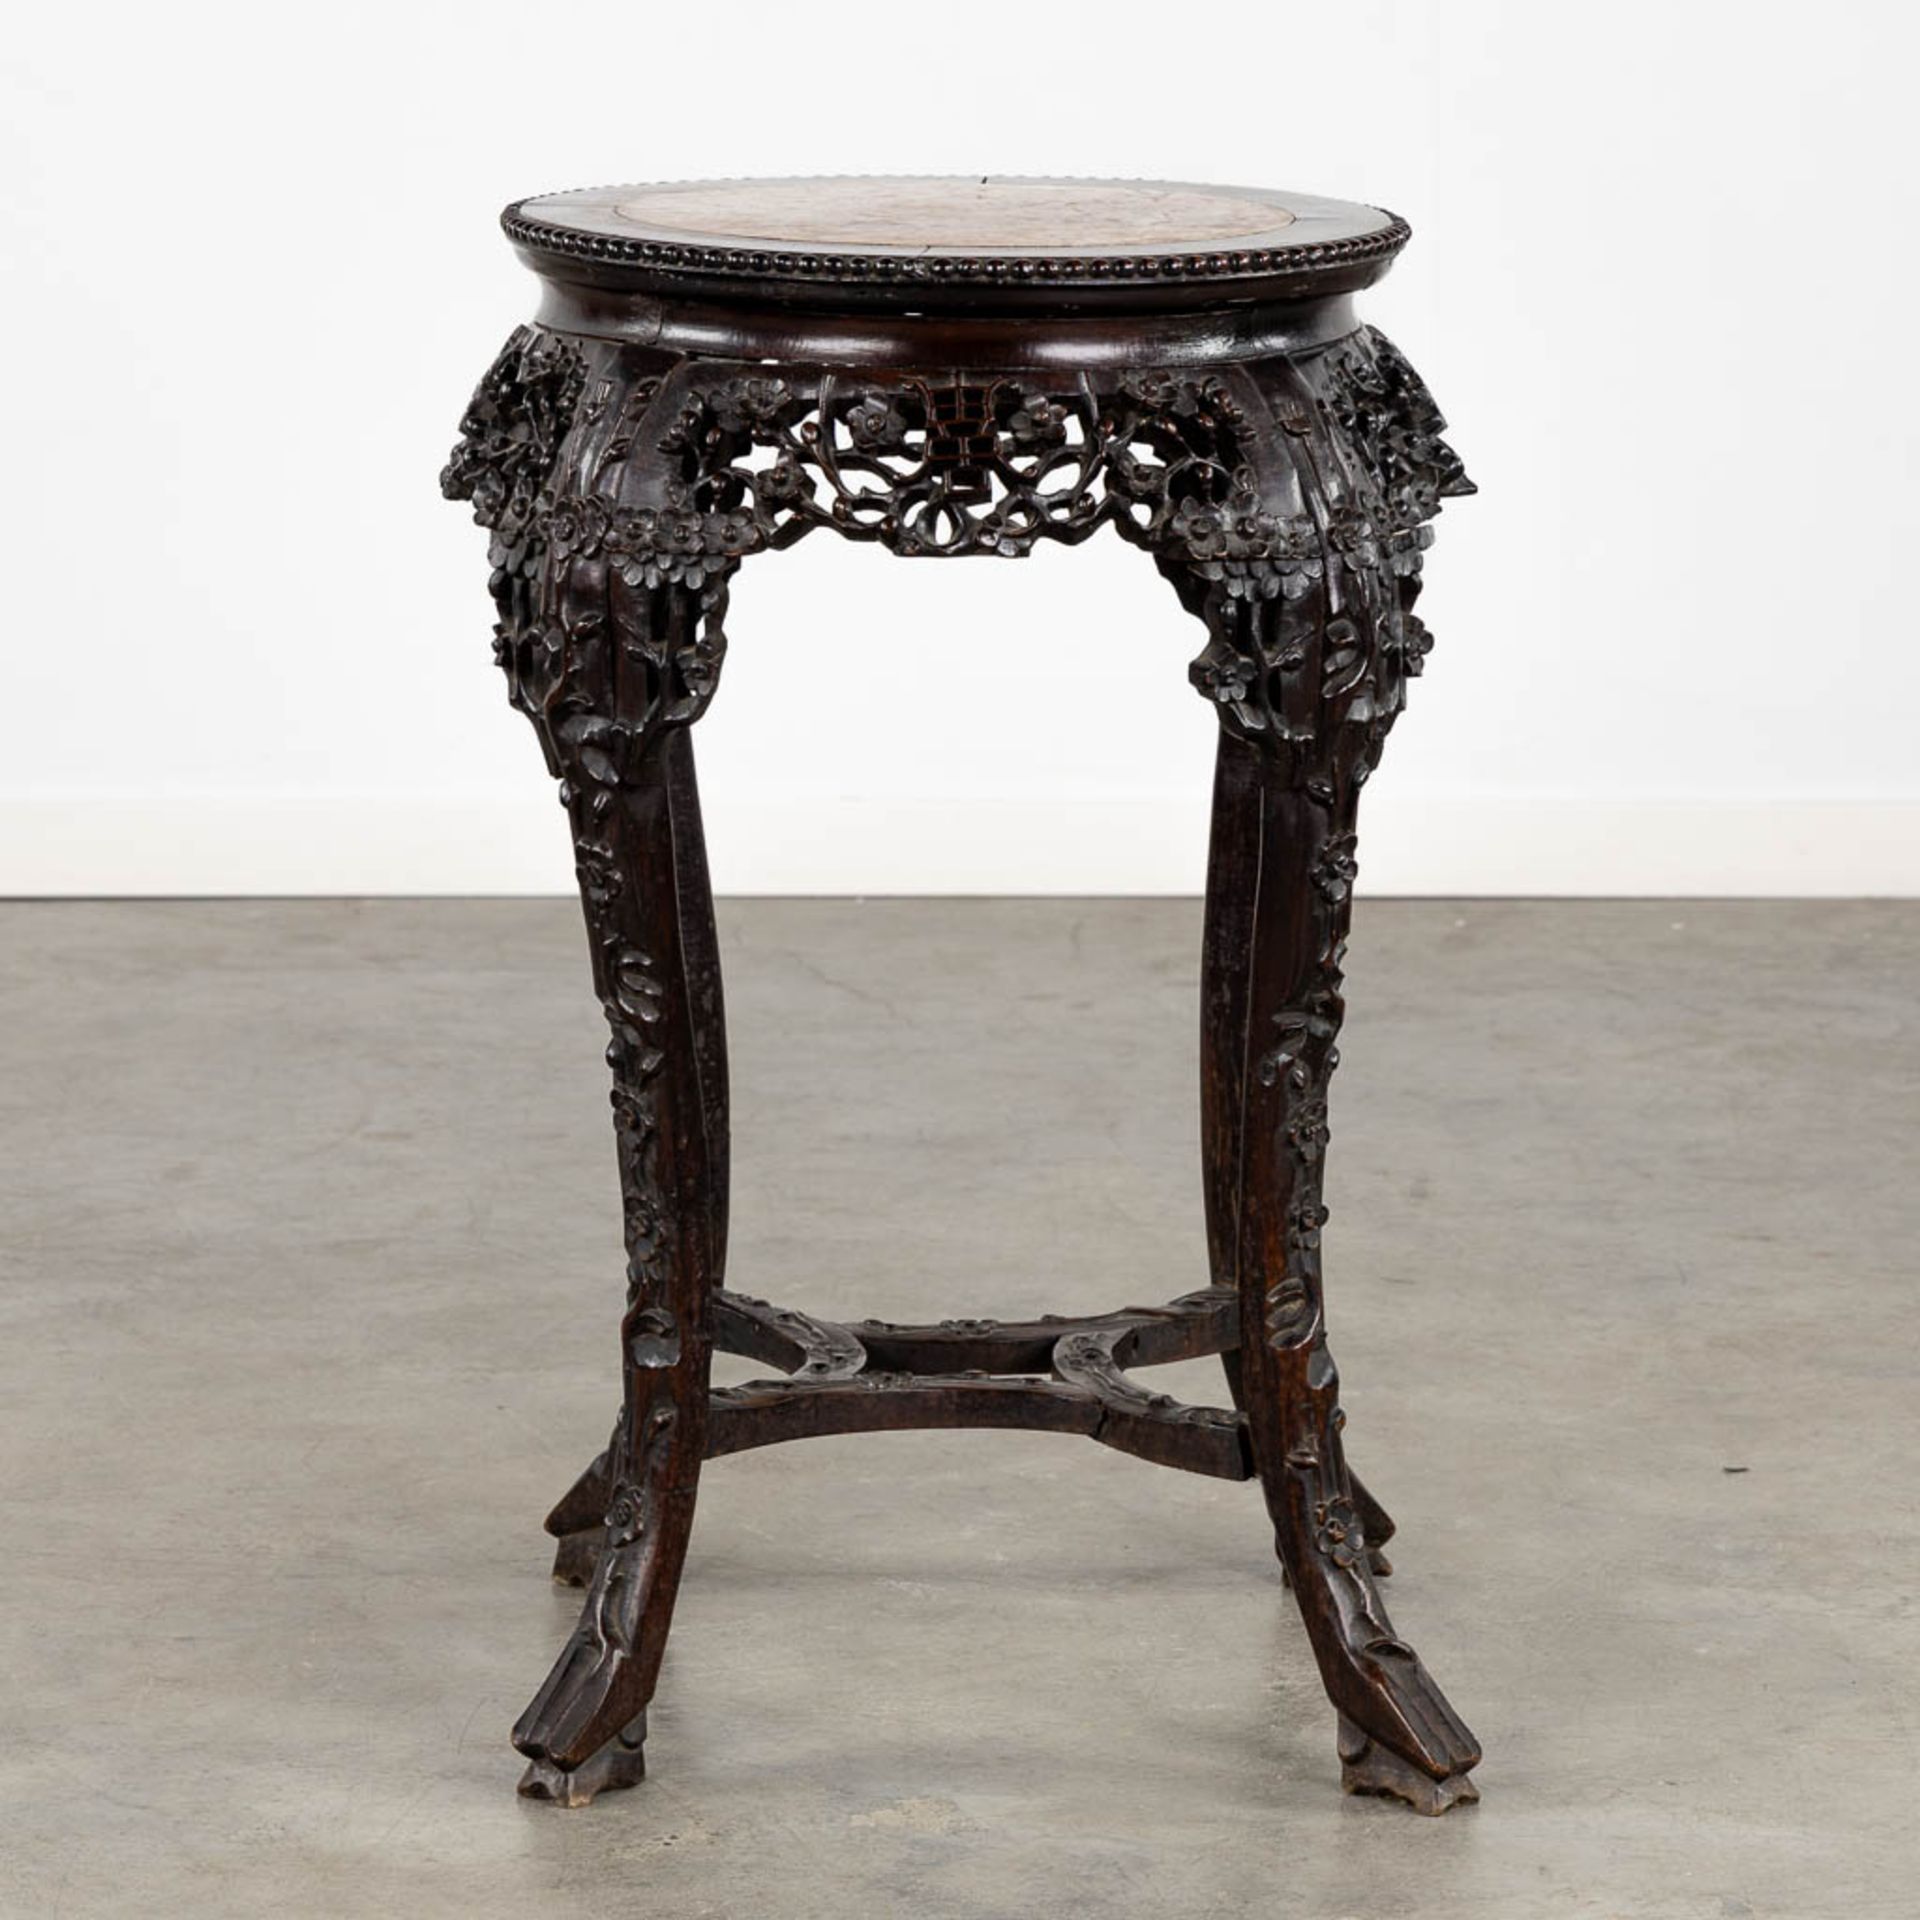 A richly sculptured Chinese hardwood side table or pedestal with a marble. (H:71 x D:53 cm) - Bild 6 aus 12